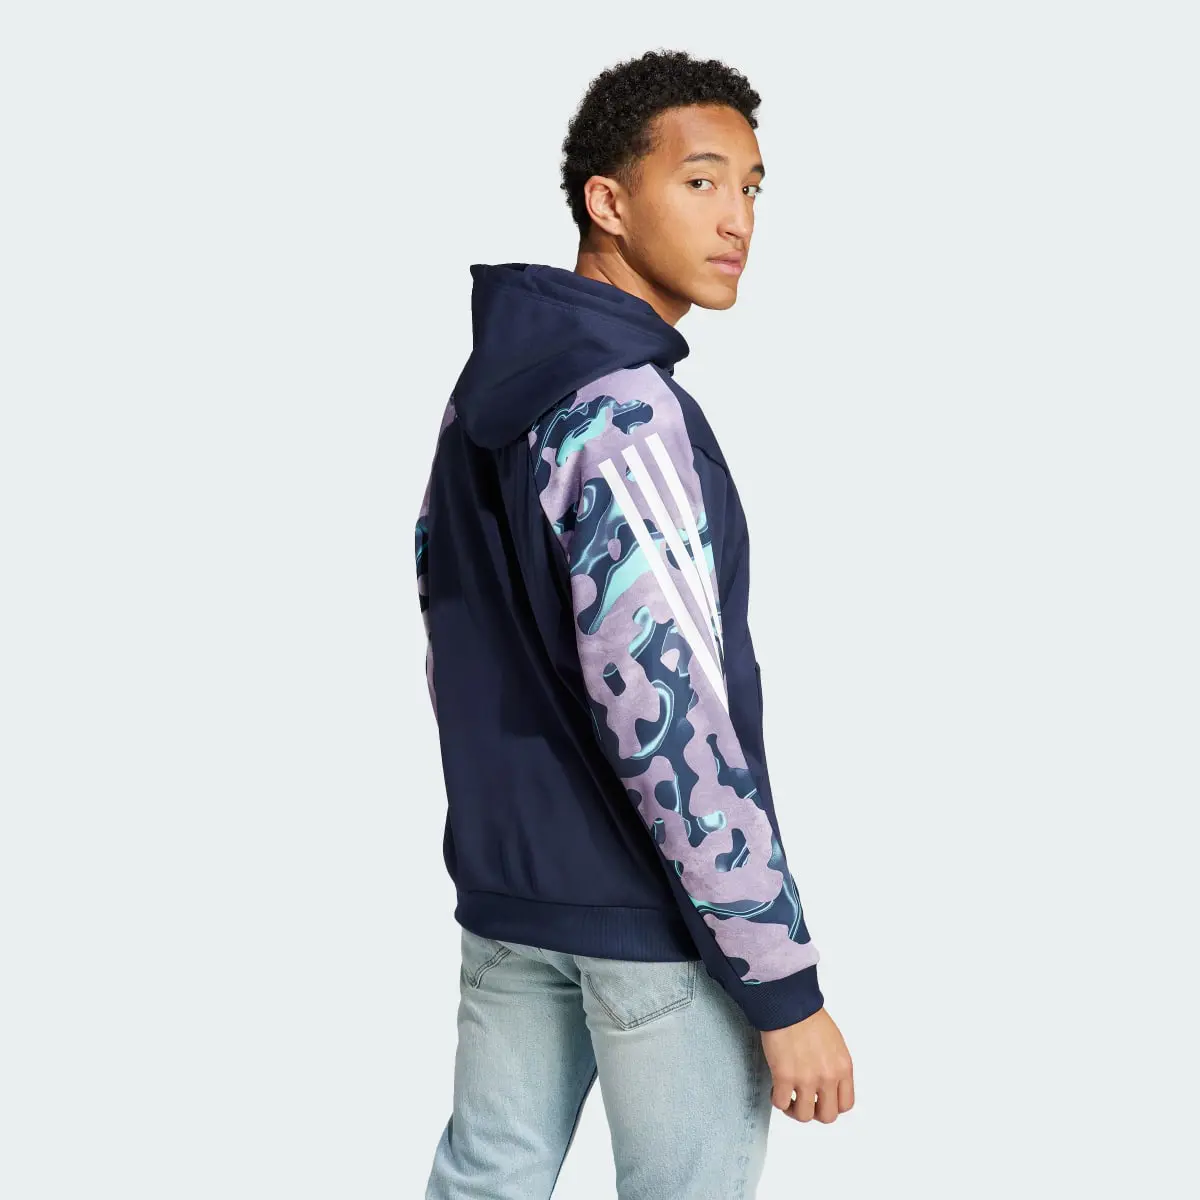 Adidas Future Icons Allover Print Hoodie. 3